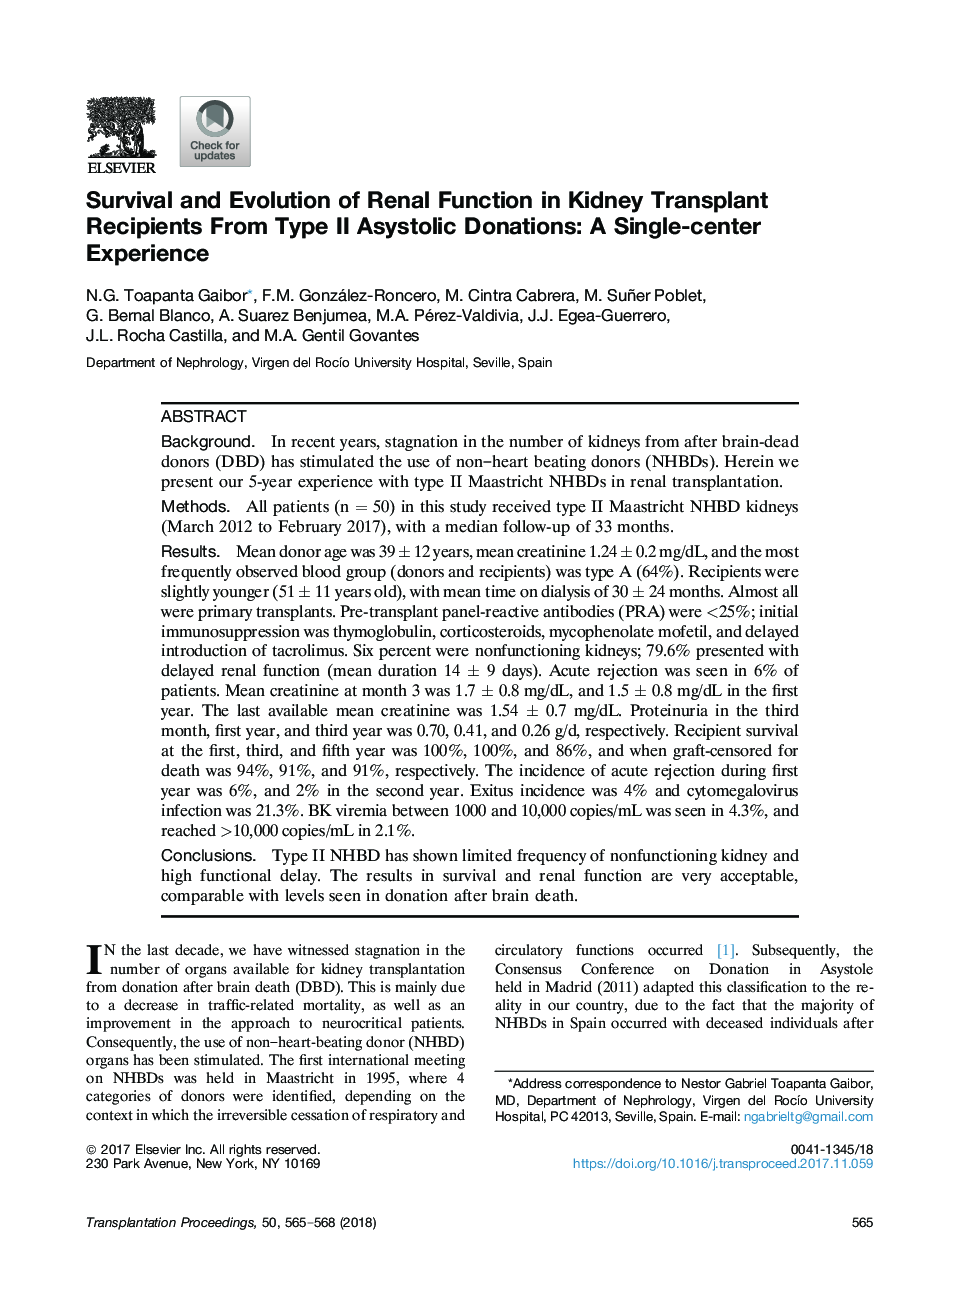 Survival and Evolution of Renal Function in Kidney Transplant Recipients From Type II Asystolic Donations: A Single-center Experience